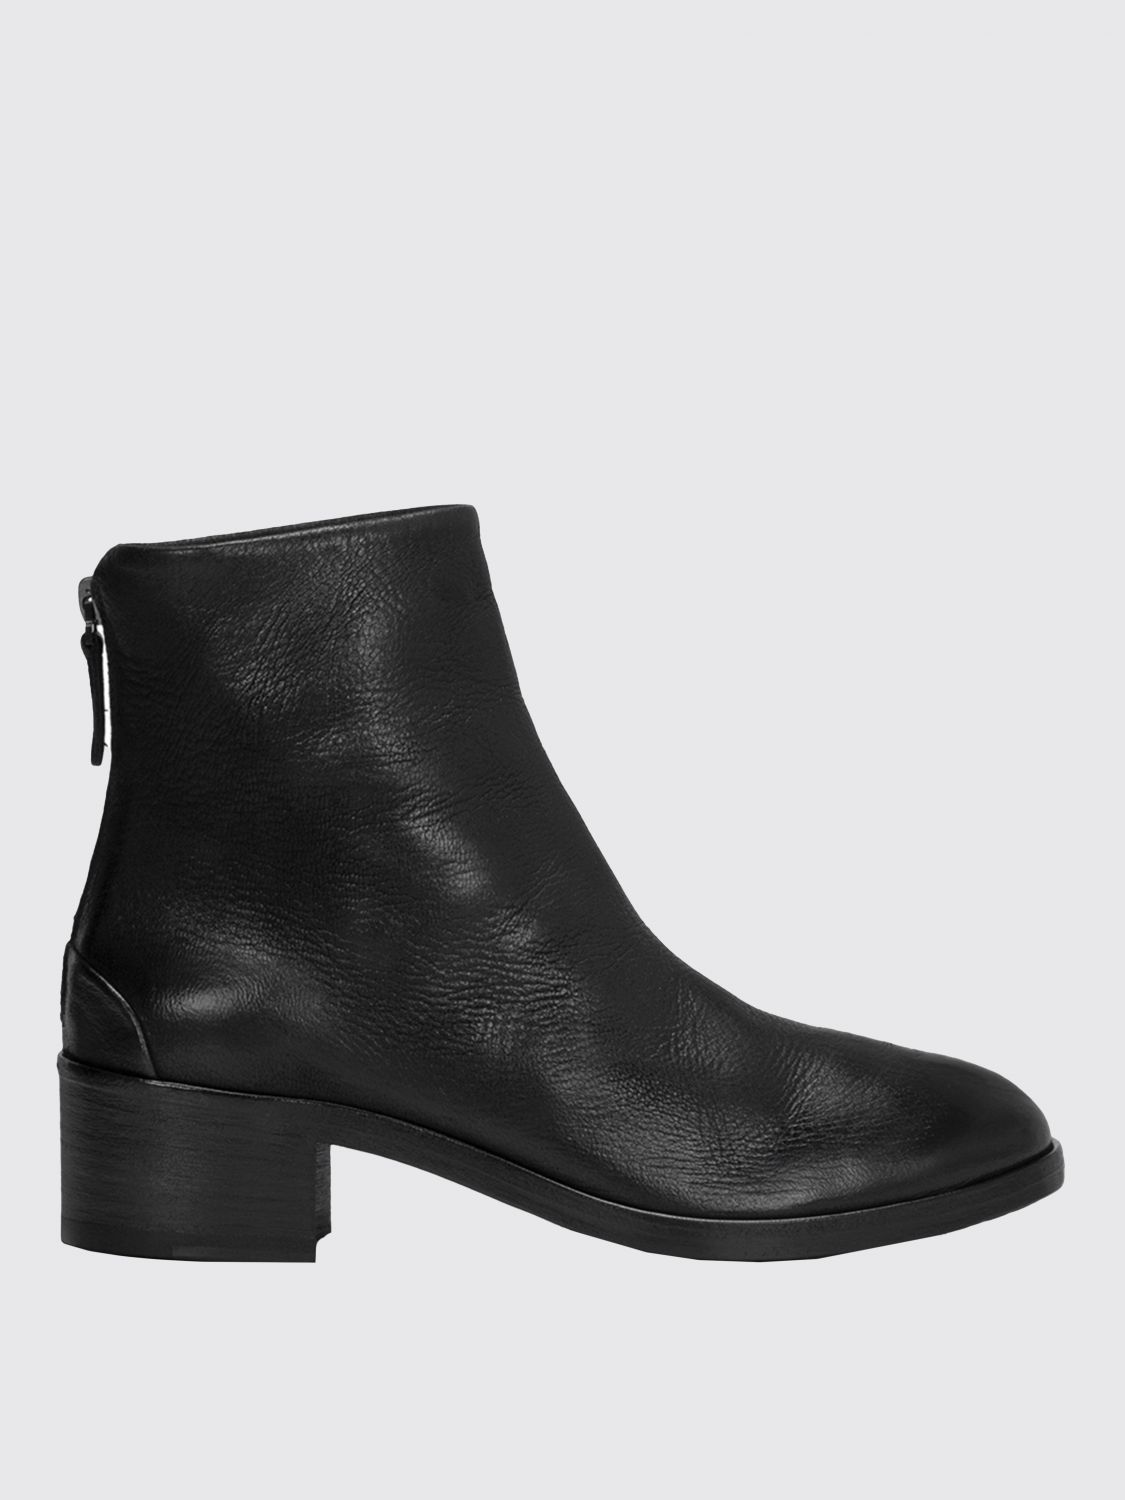 Marsèll Outlet: flat ankle boots for woman - Black | Marsèll flat ankle ...